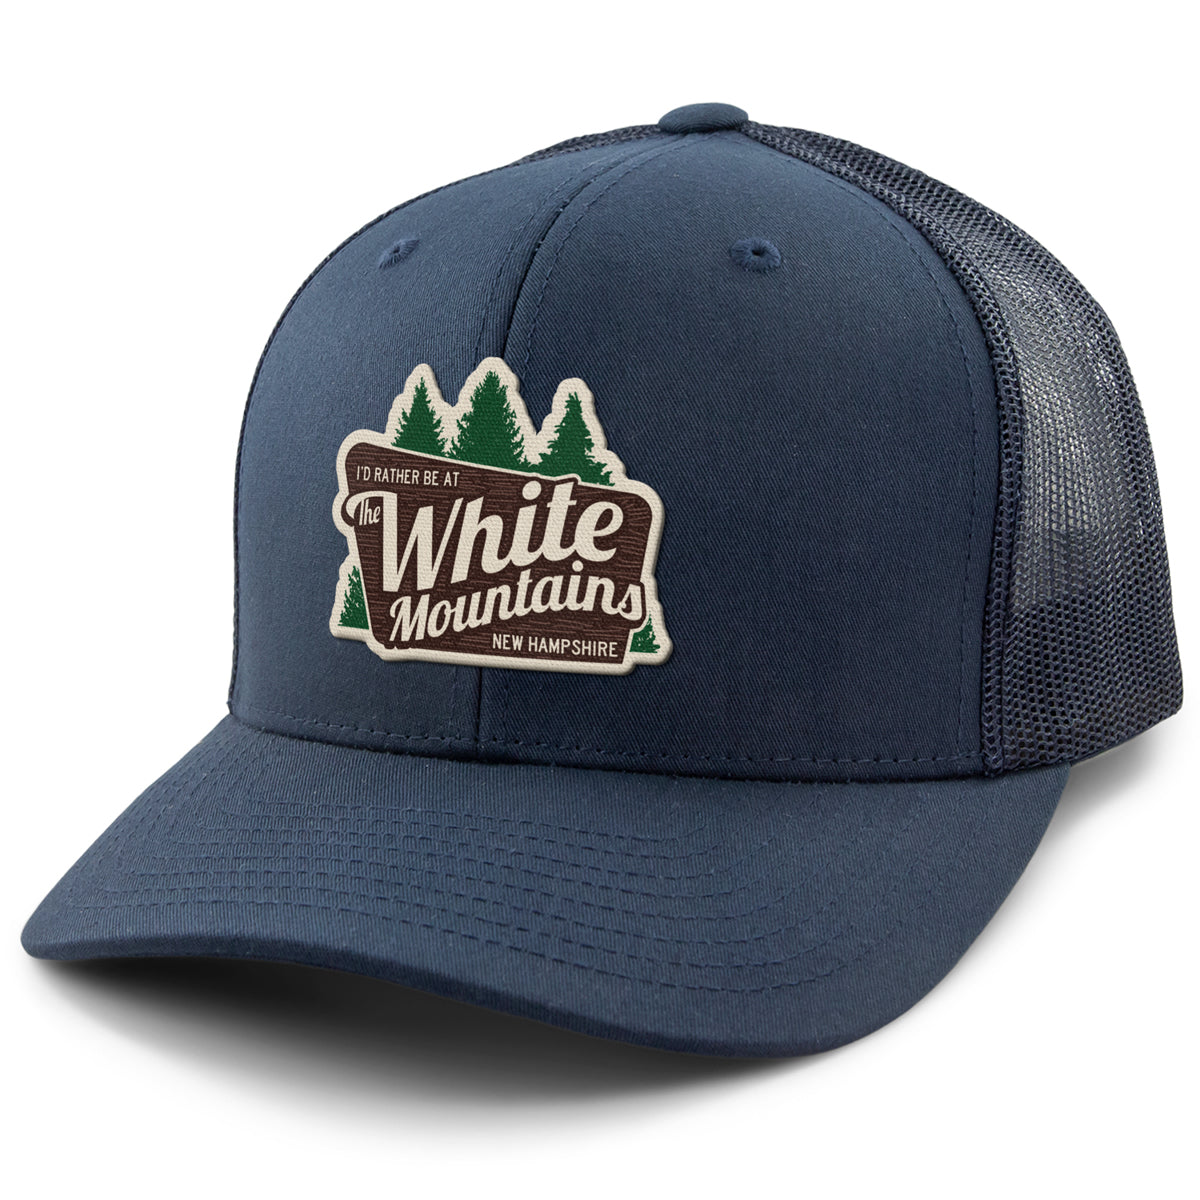 I'd Rather Be At The White Mountains Classic Snapback Trucker - Chowdaheadz